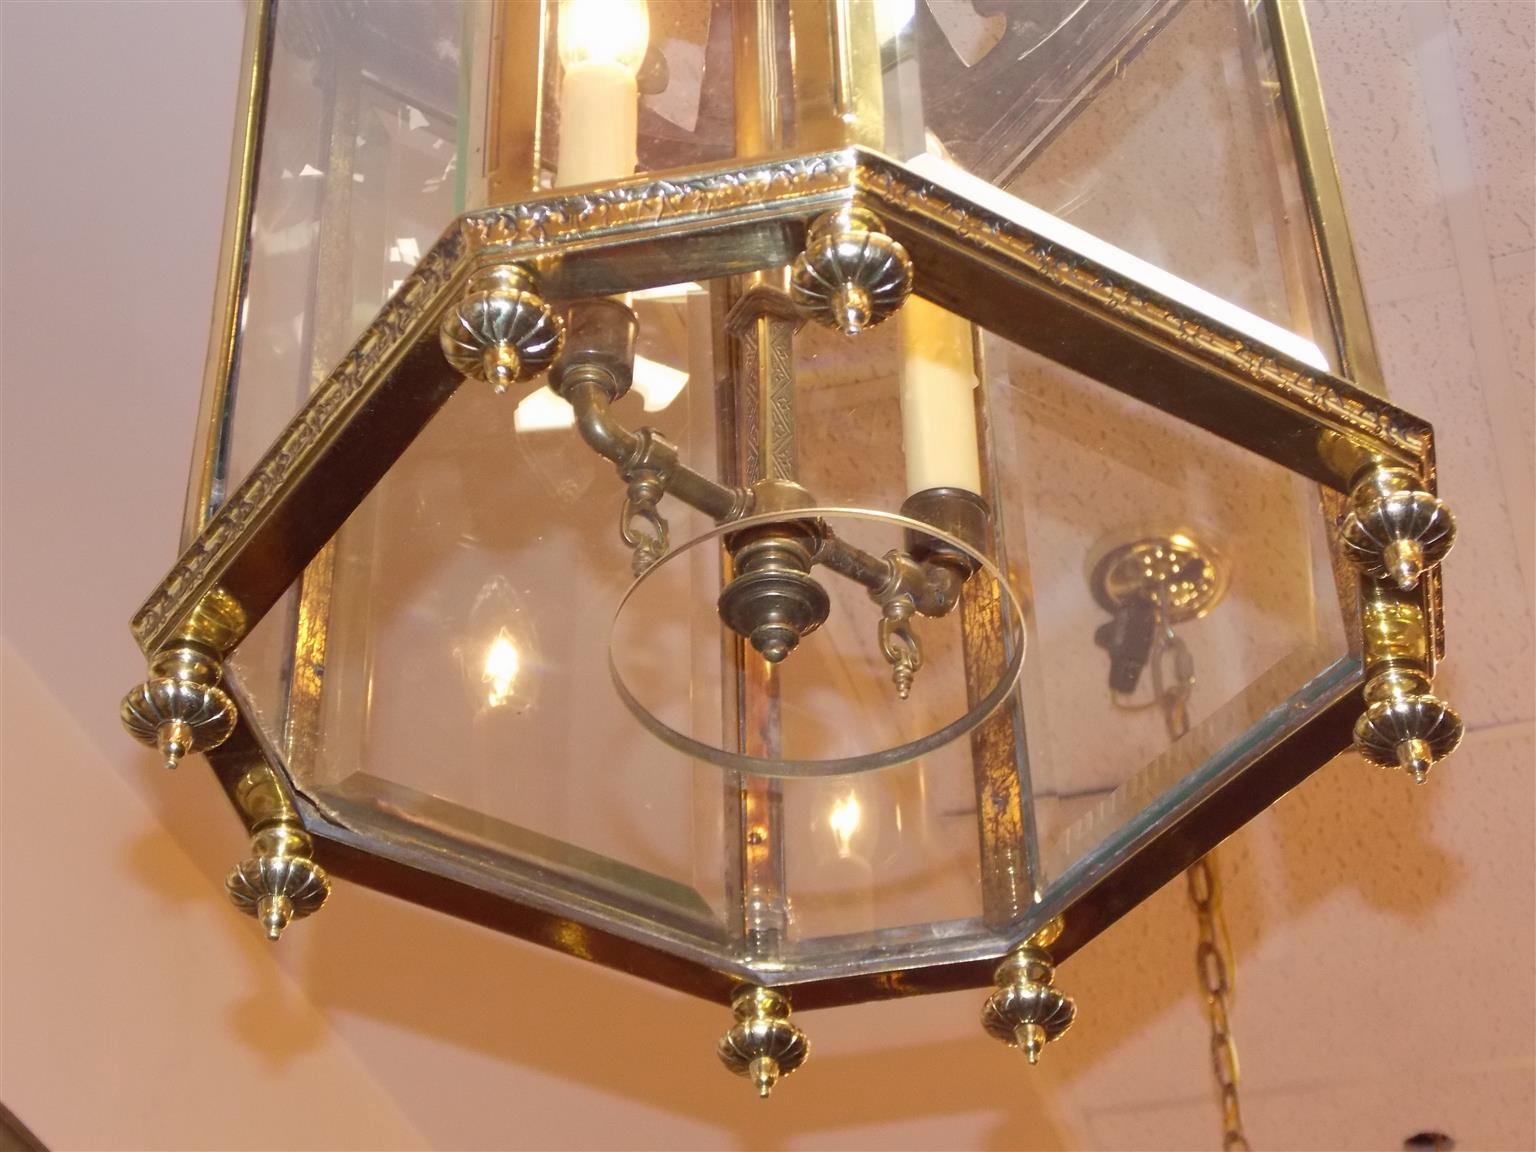 Early 19th Century English Brass Octagon Decorative Dome and Beveled Glass Hall Lantern, Circa 1820